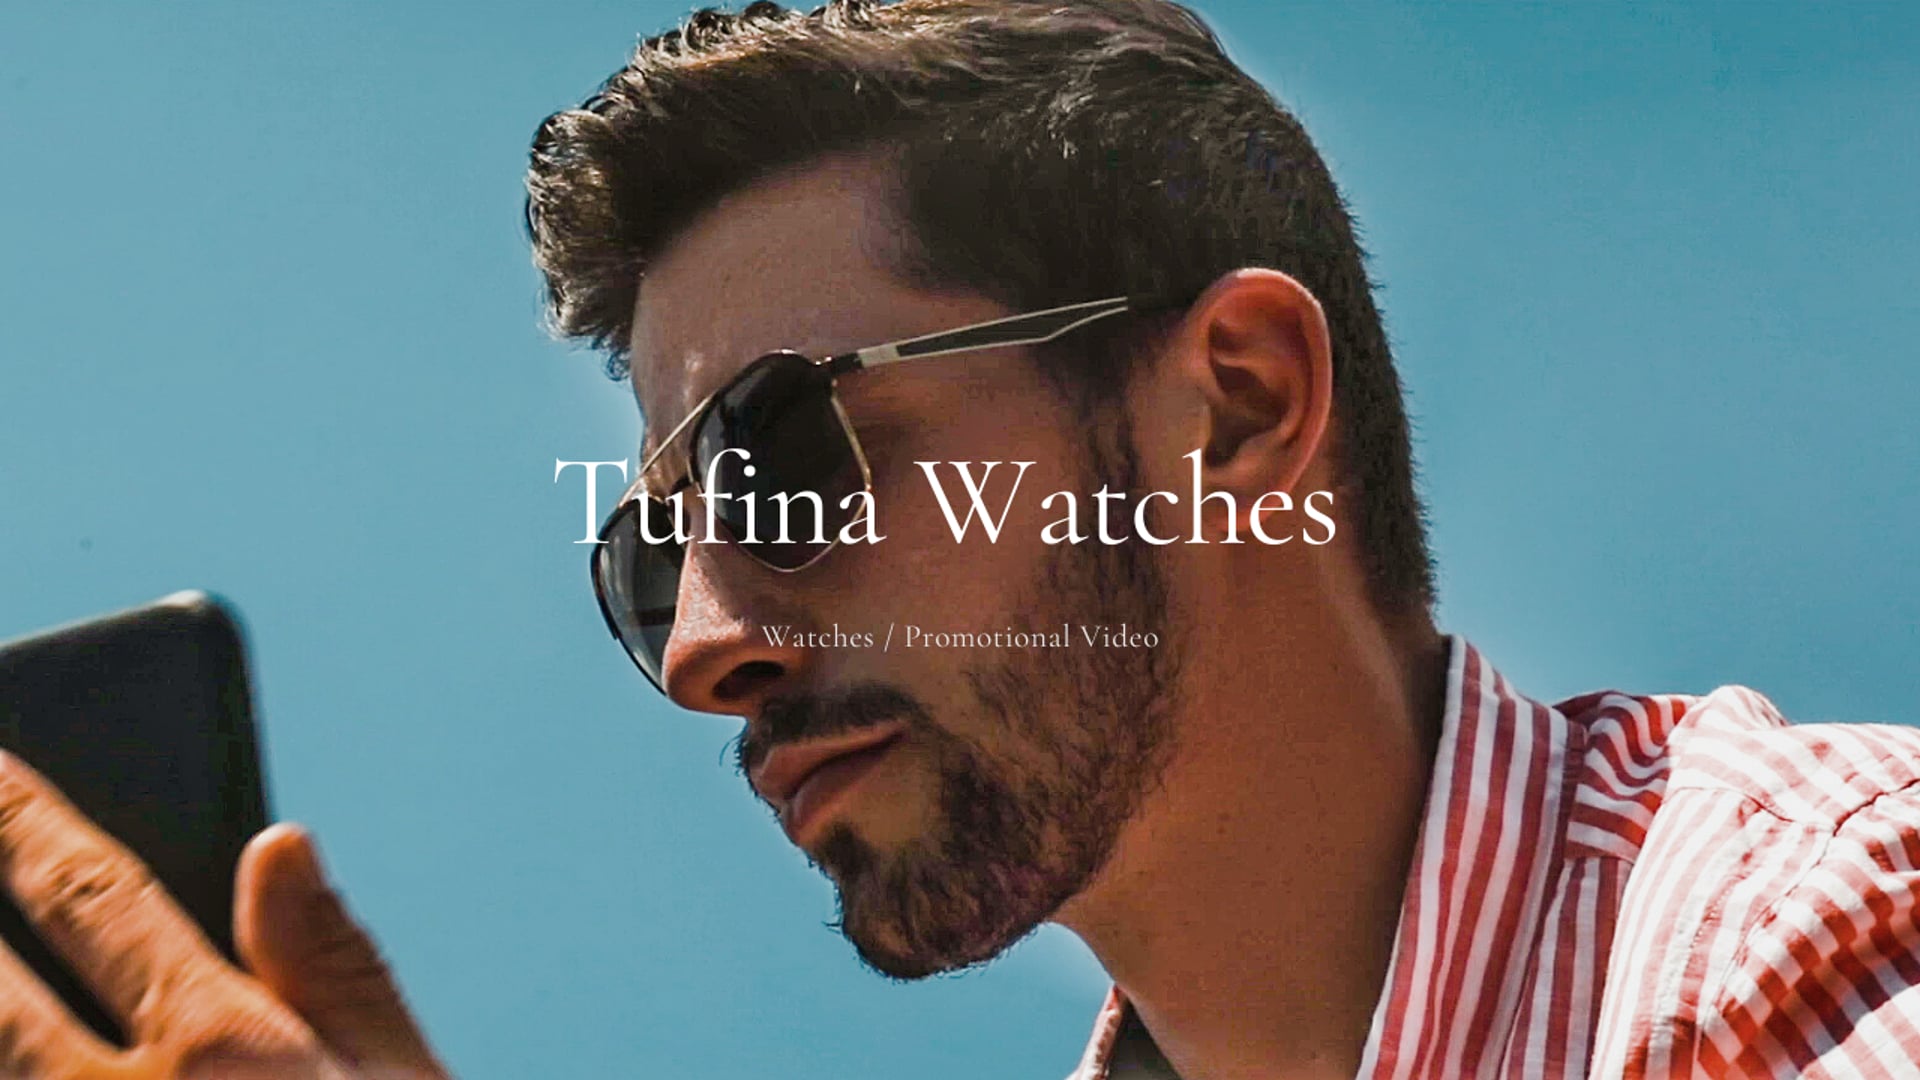 TUFINA / Watches / Promotional Video